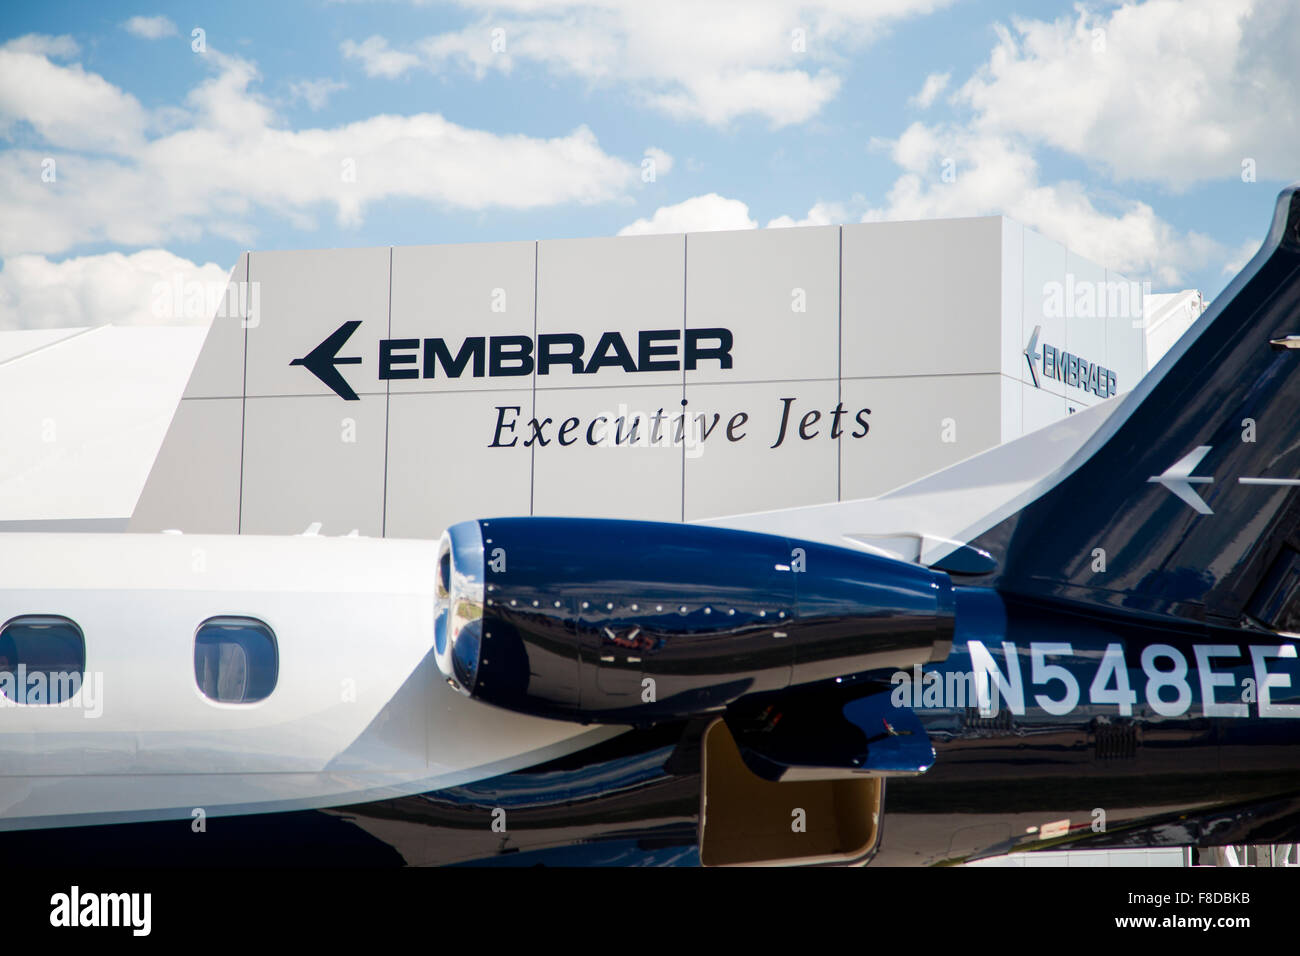 Embraer Executive Jets logo and part of a jet an air show Stock Photo